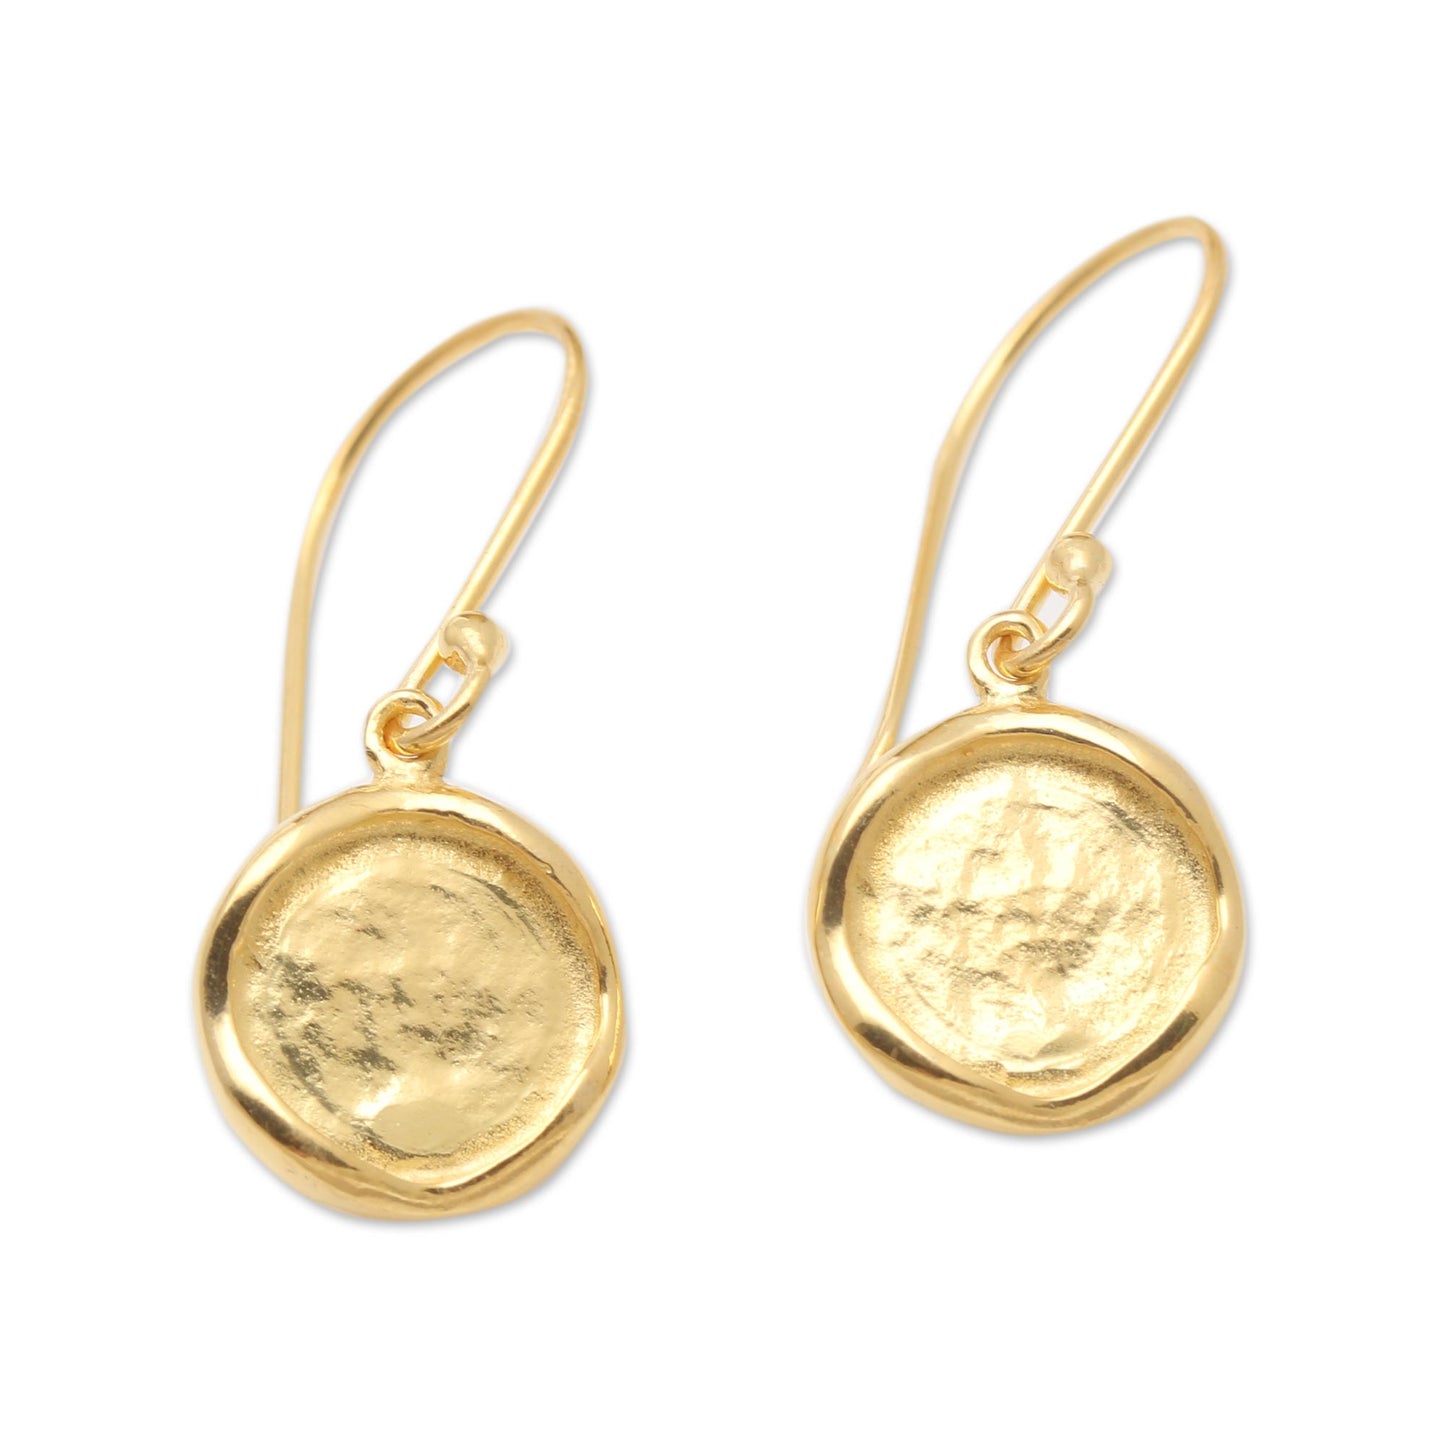 Mirror of Life Hand Crafted Gold-Plated Sterling Silver Dangle Earrings